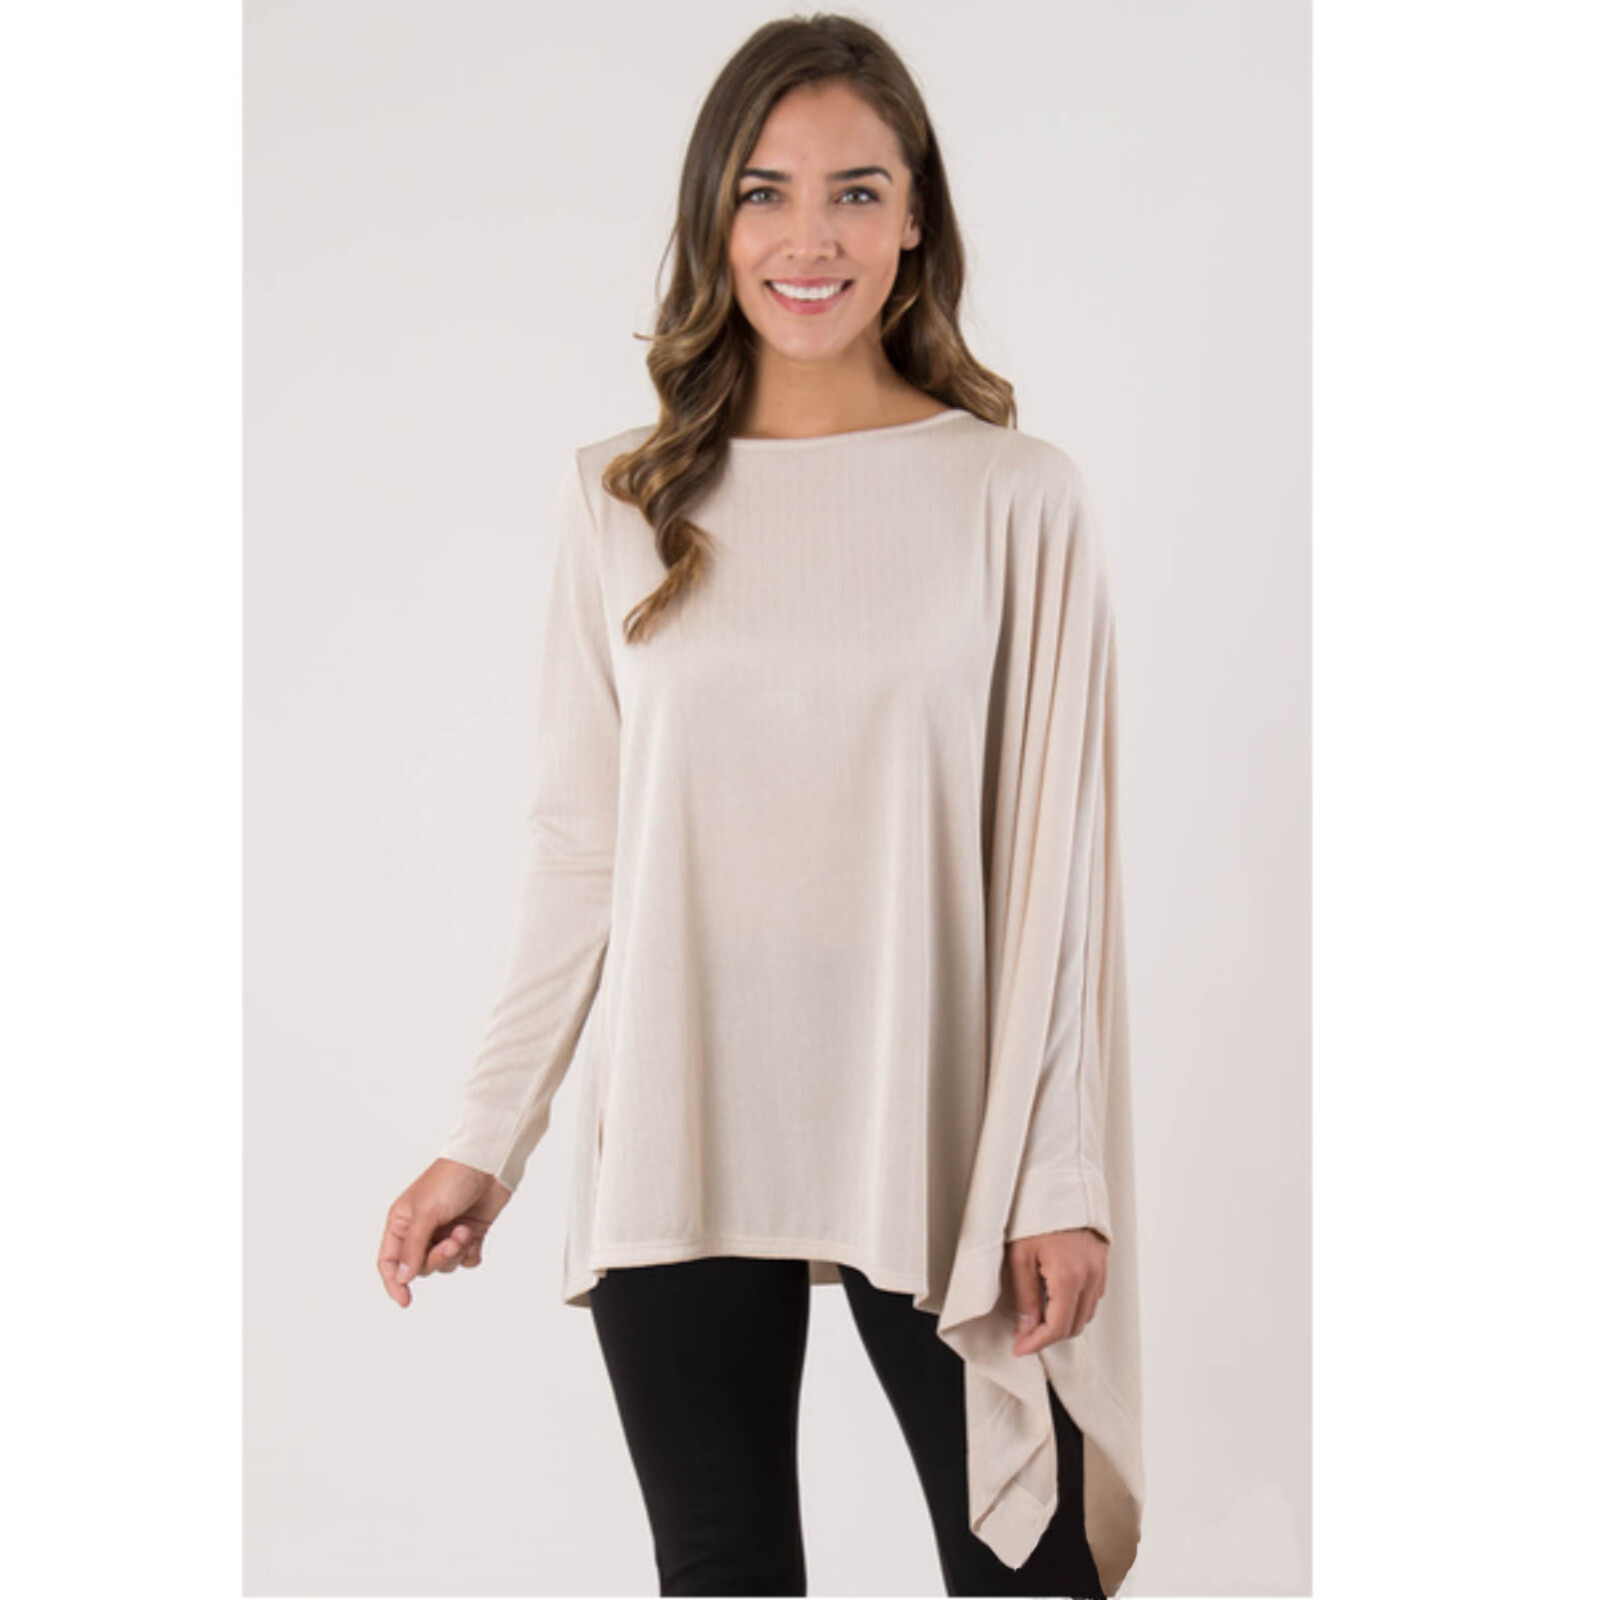 Simply Noelle Cape Sleeve Top - XS     TOP8001XS loading=